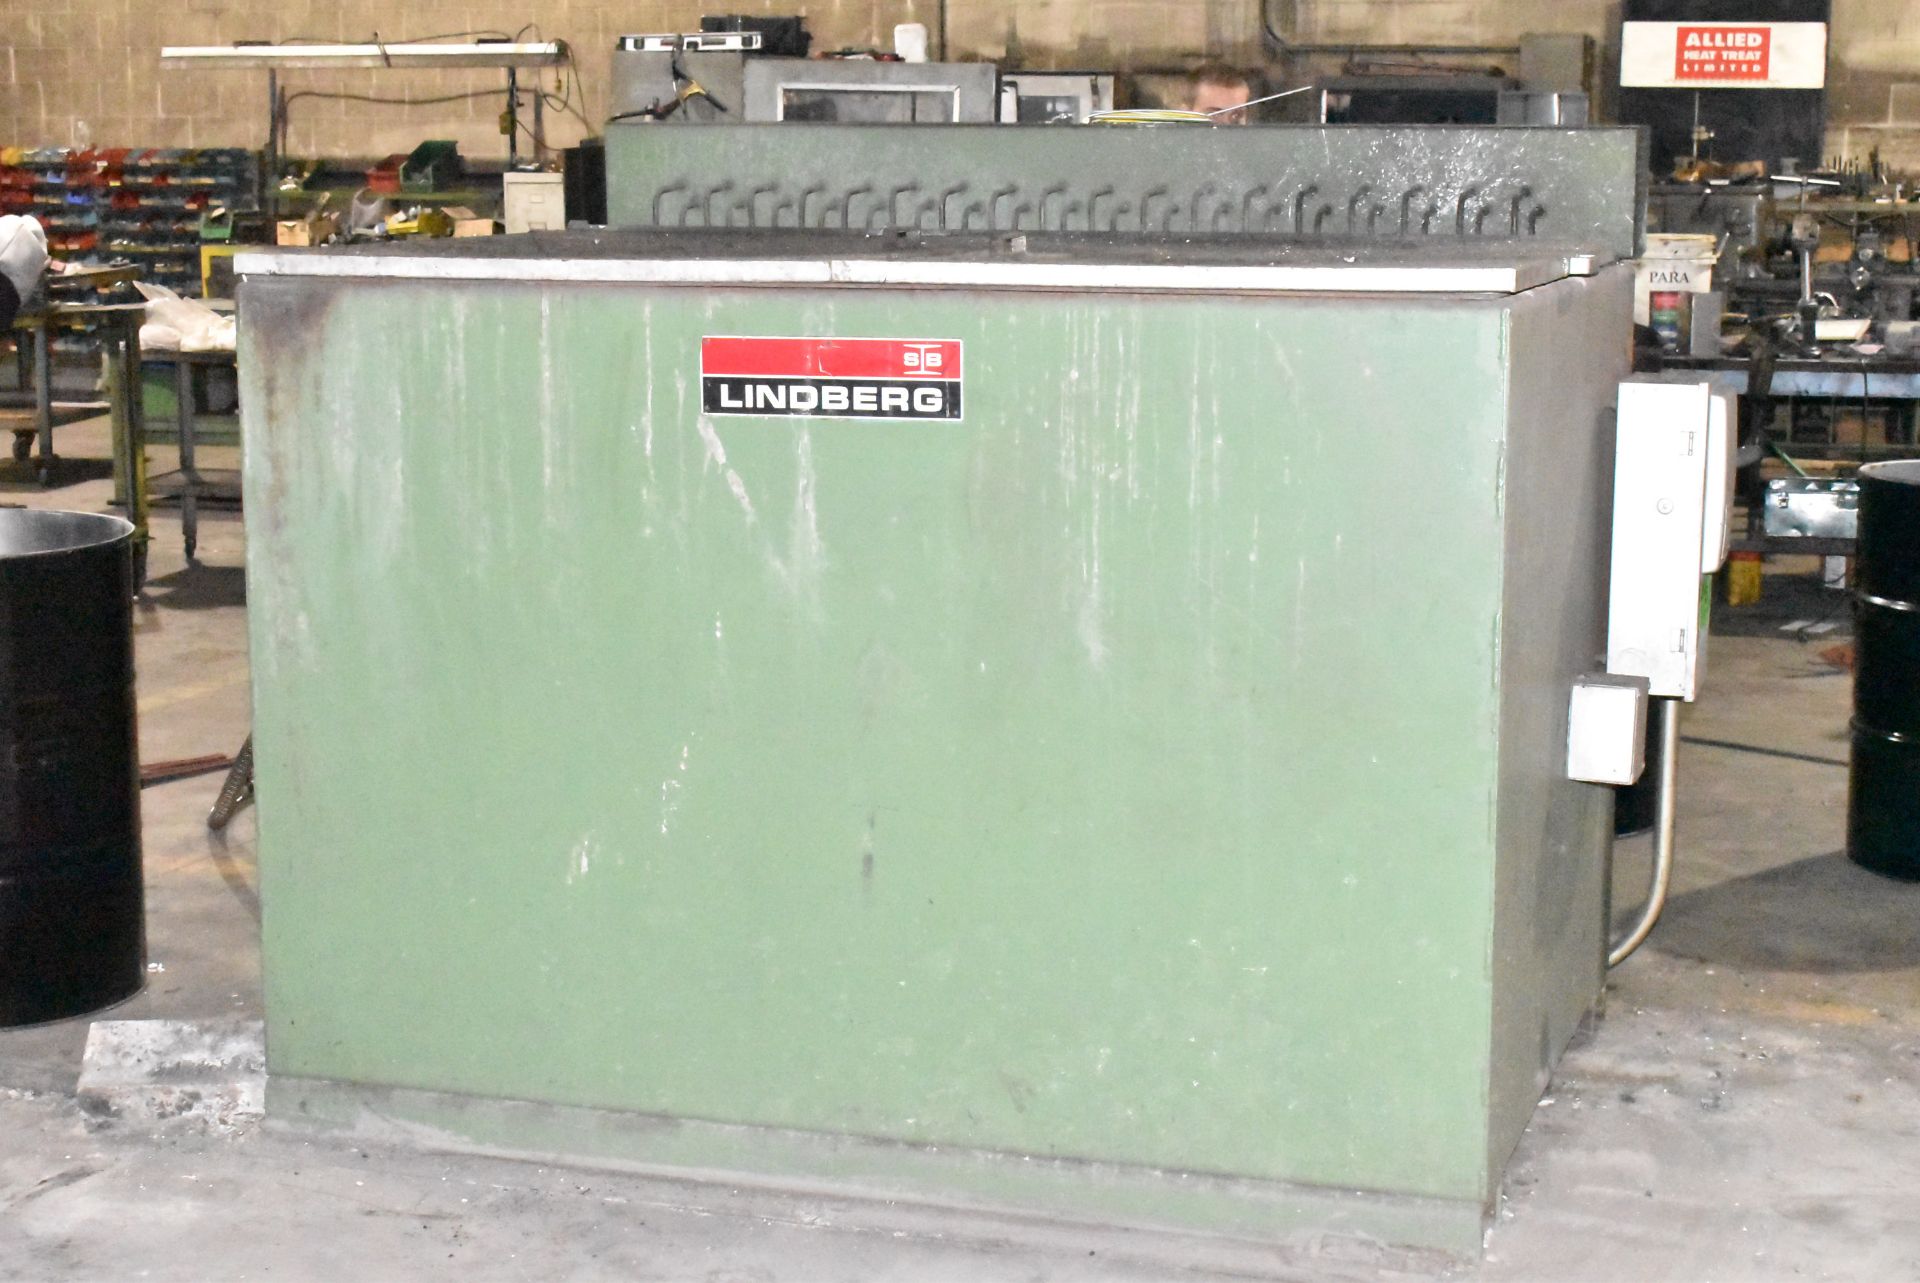 LINDBERG MODEL 484872 ELECTRIC SALT FURNACE WITH 500 DEGREES F MAX TEMP, 48"Wx72"Lx48"D APPROX SIZE, - Image 3 of 6